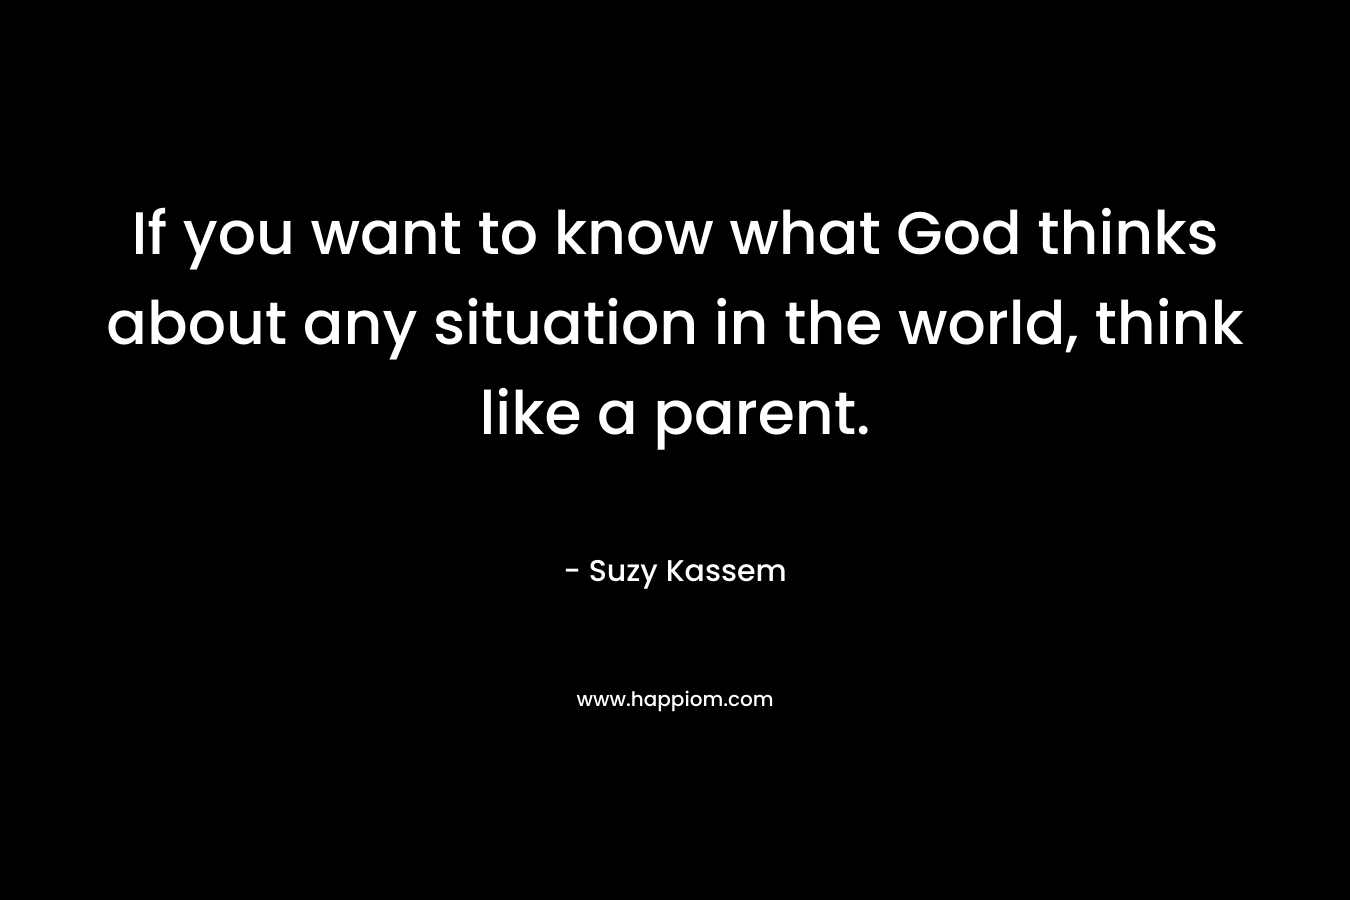 If you want to know what God thinks about any situation in the world, think like a parent.